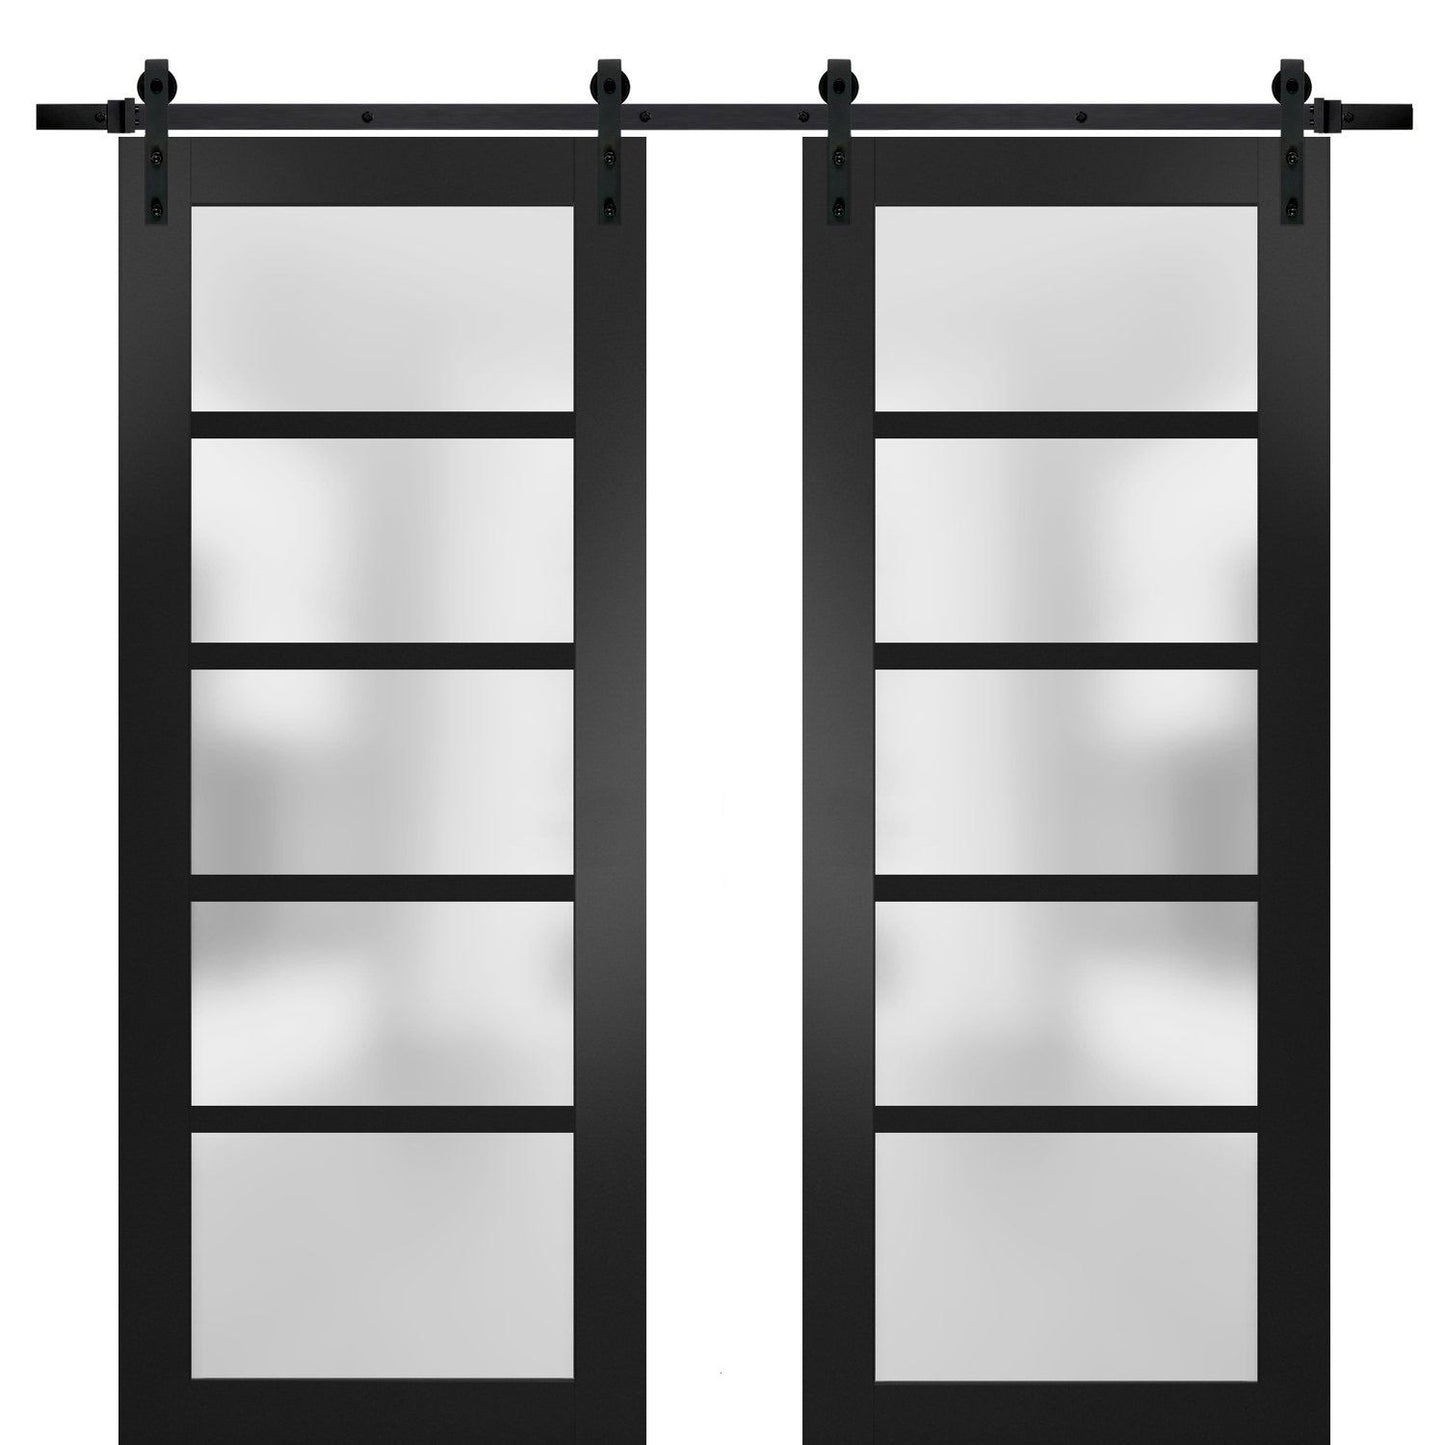 Quadro 4002 Matte Black Double Barn Door with Frosted Glass | Black Rail